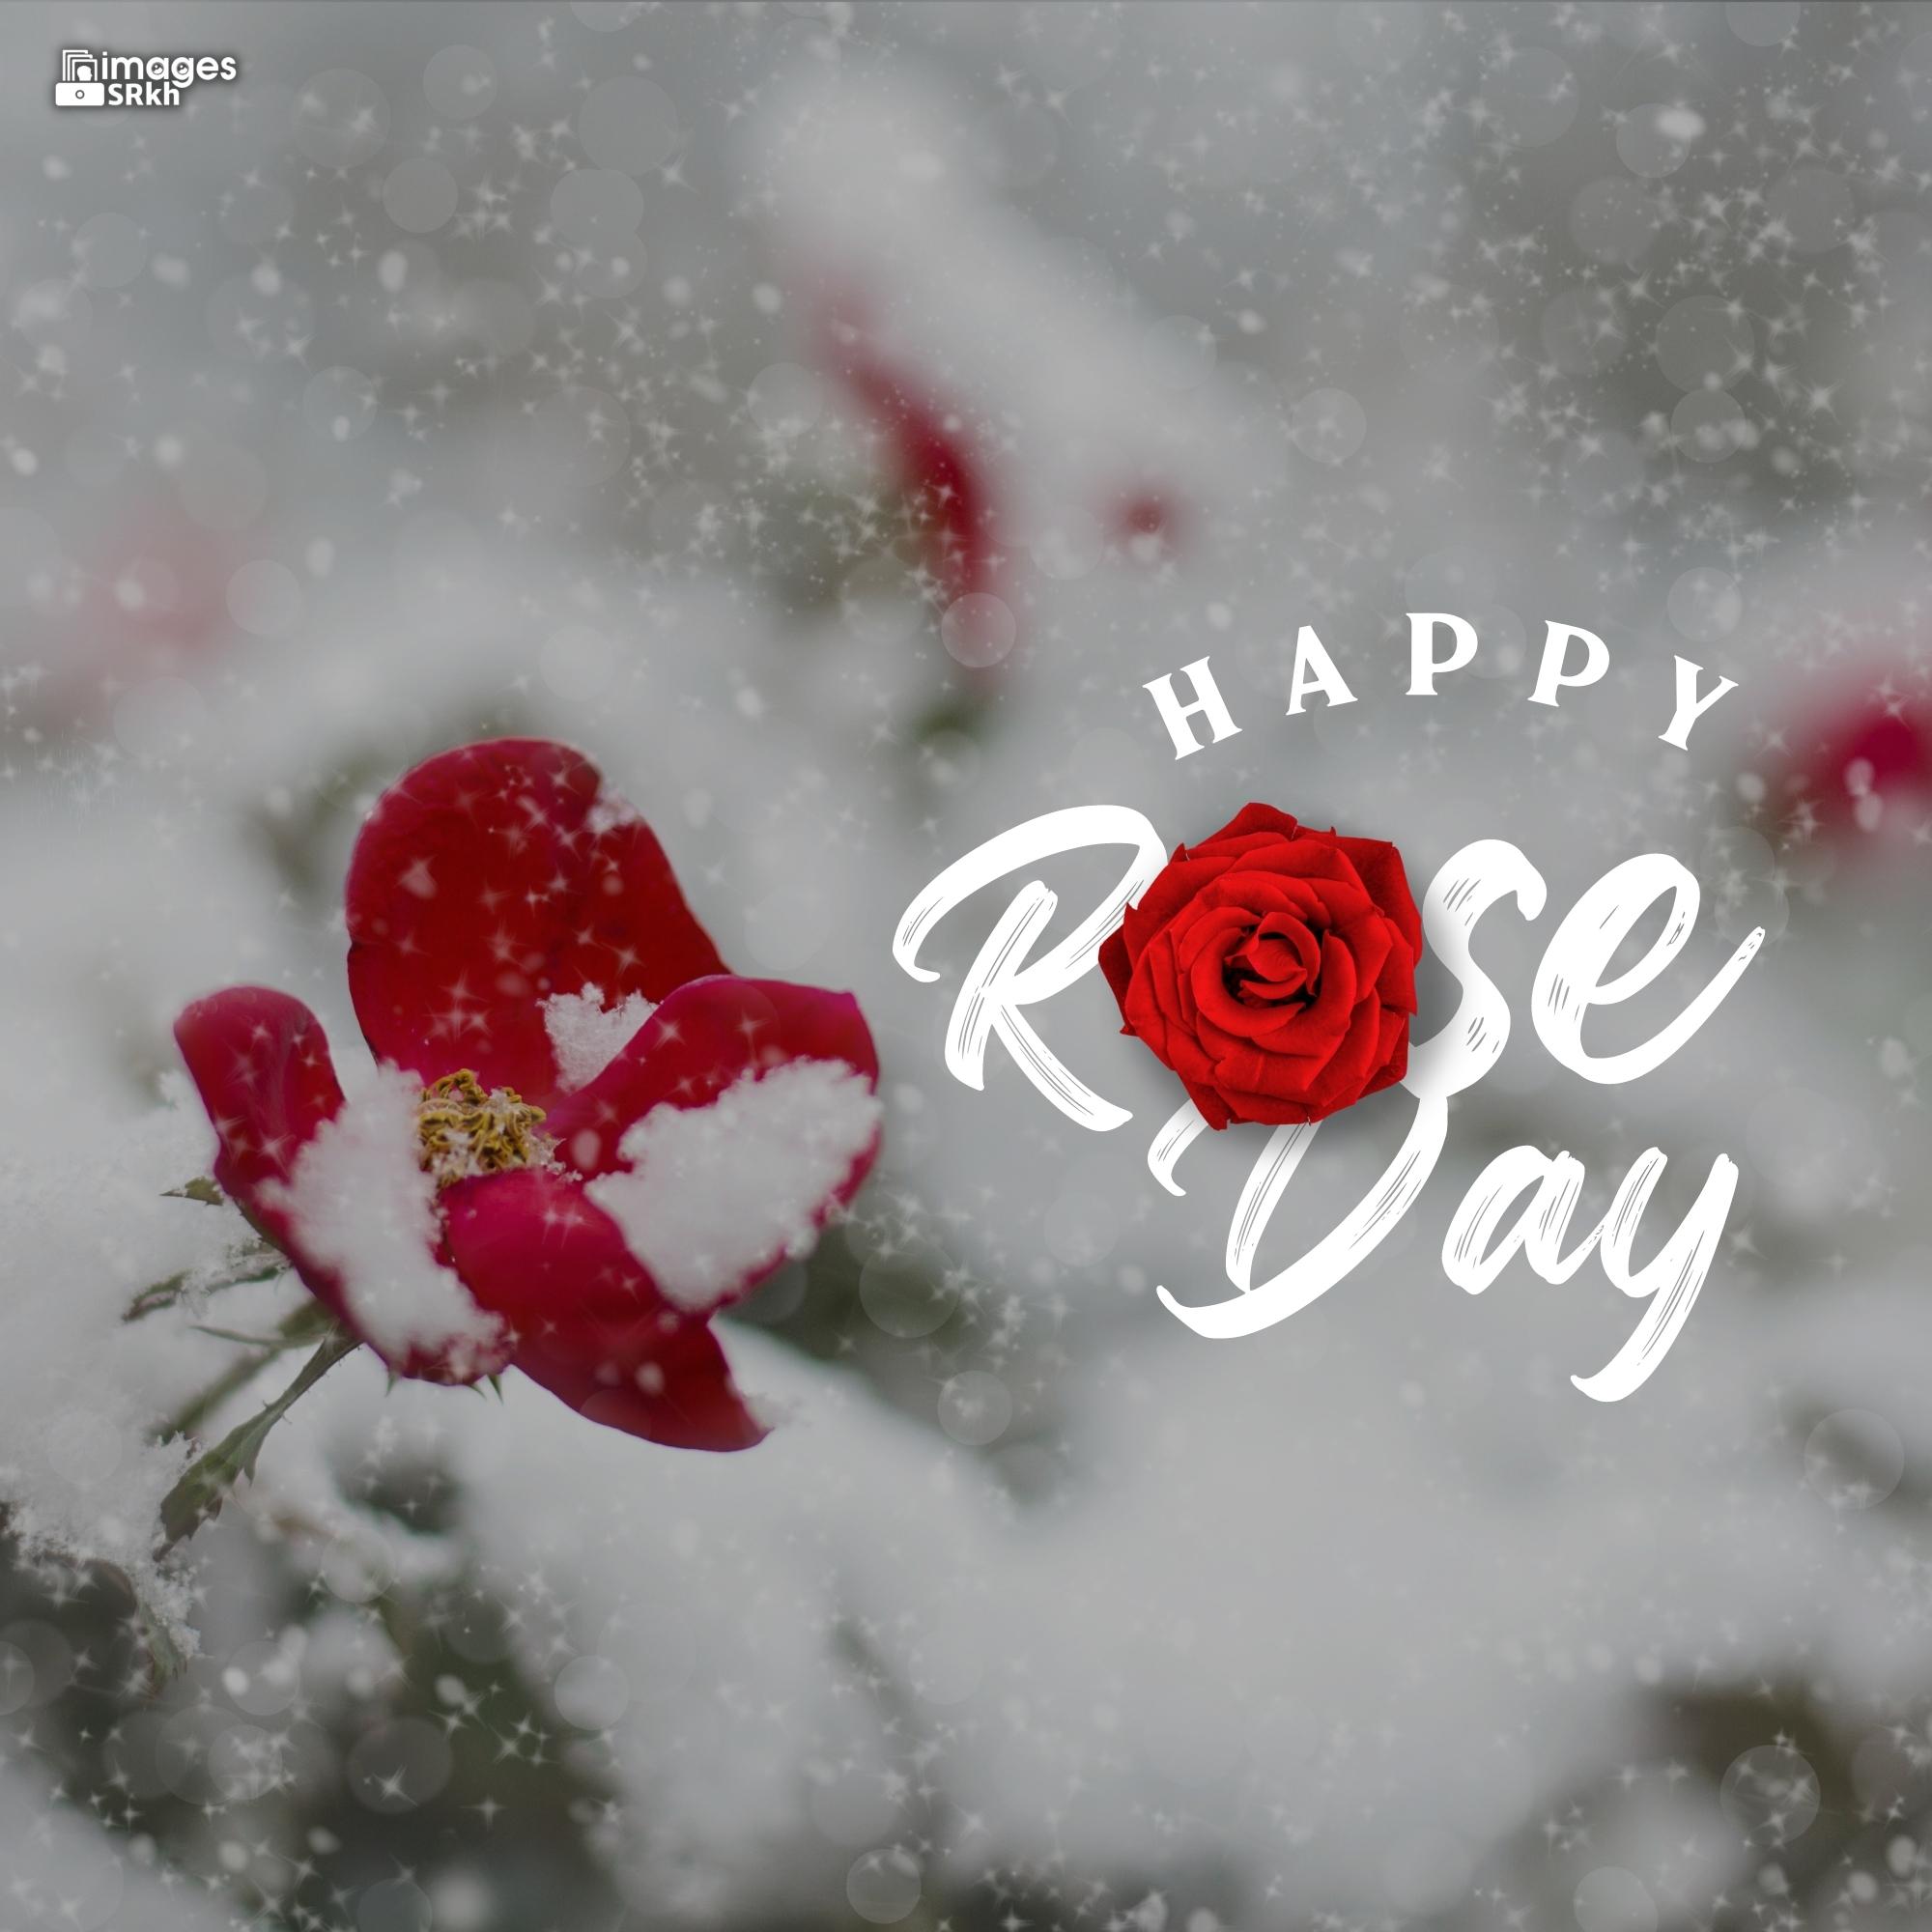 Happy Rose Day Image Hd Download (10)